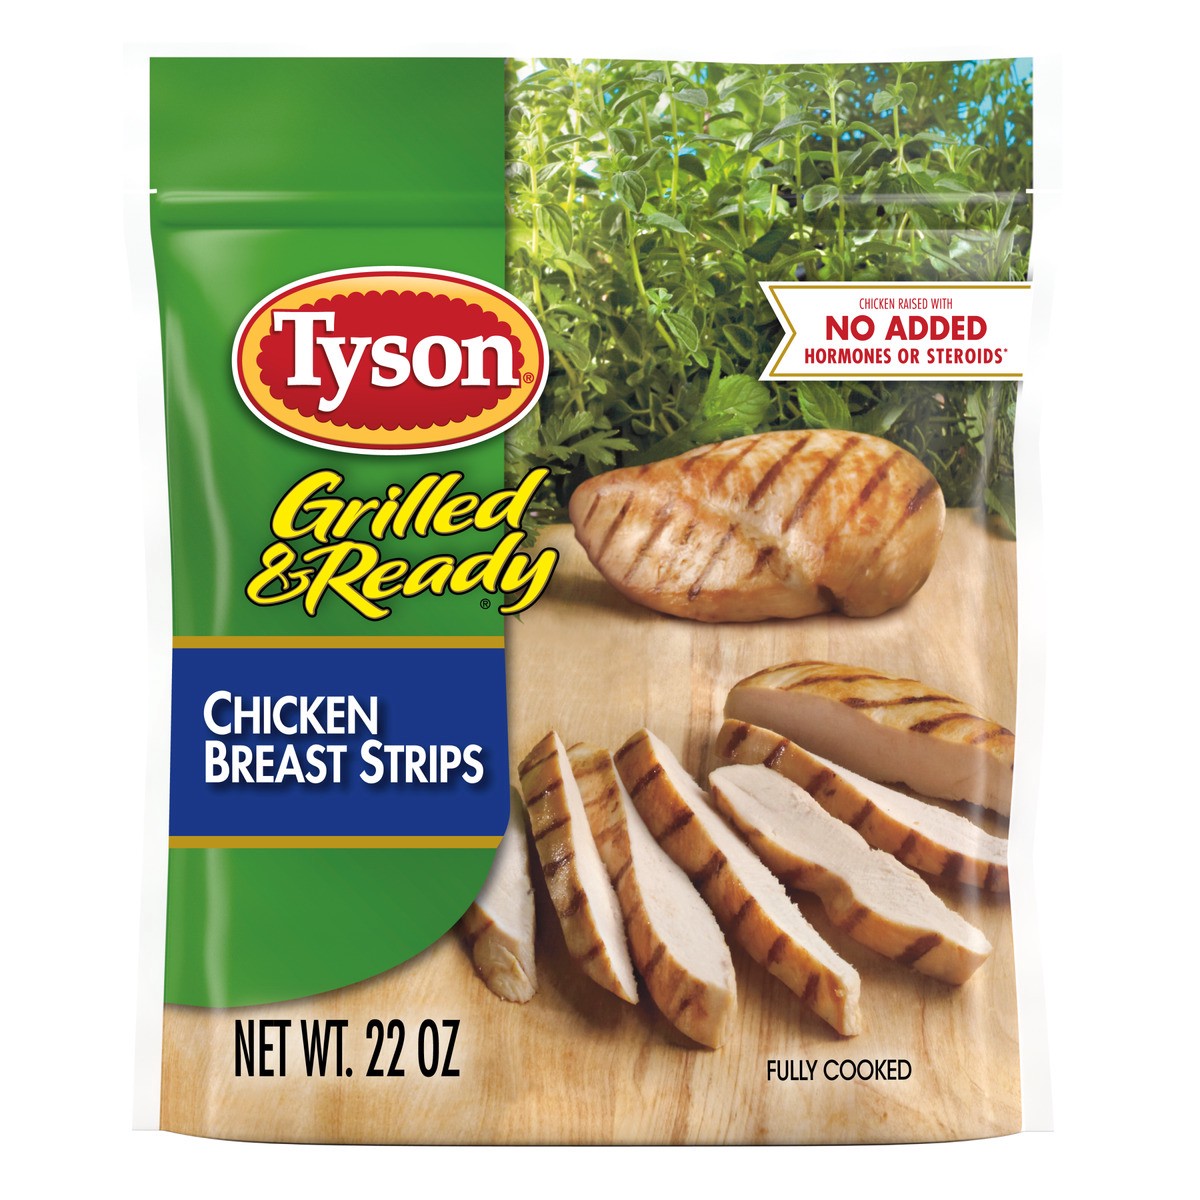 slide 2 of 10, TYSON GRILLED AND READY Tyson Grilled & Ready Fully Cooked Grilled Chicken Breast Strips, 22 oz. (Frozen), 623.69 g